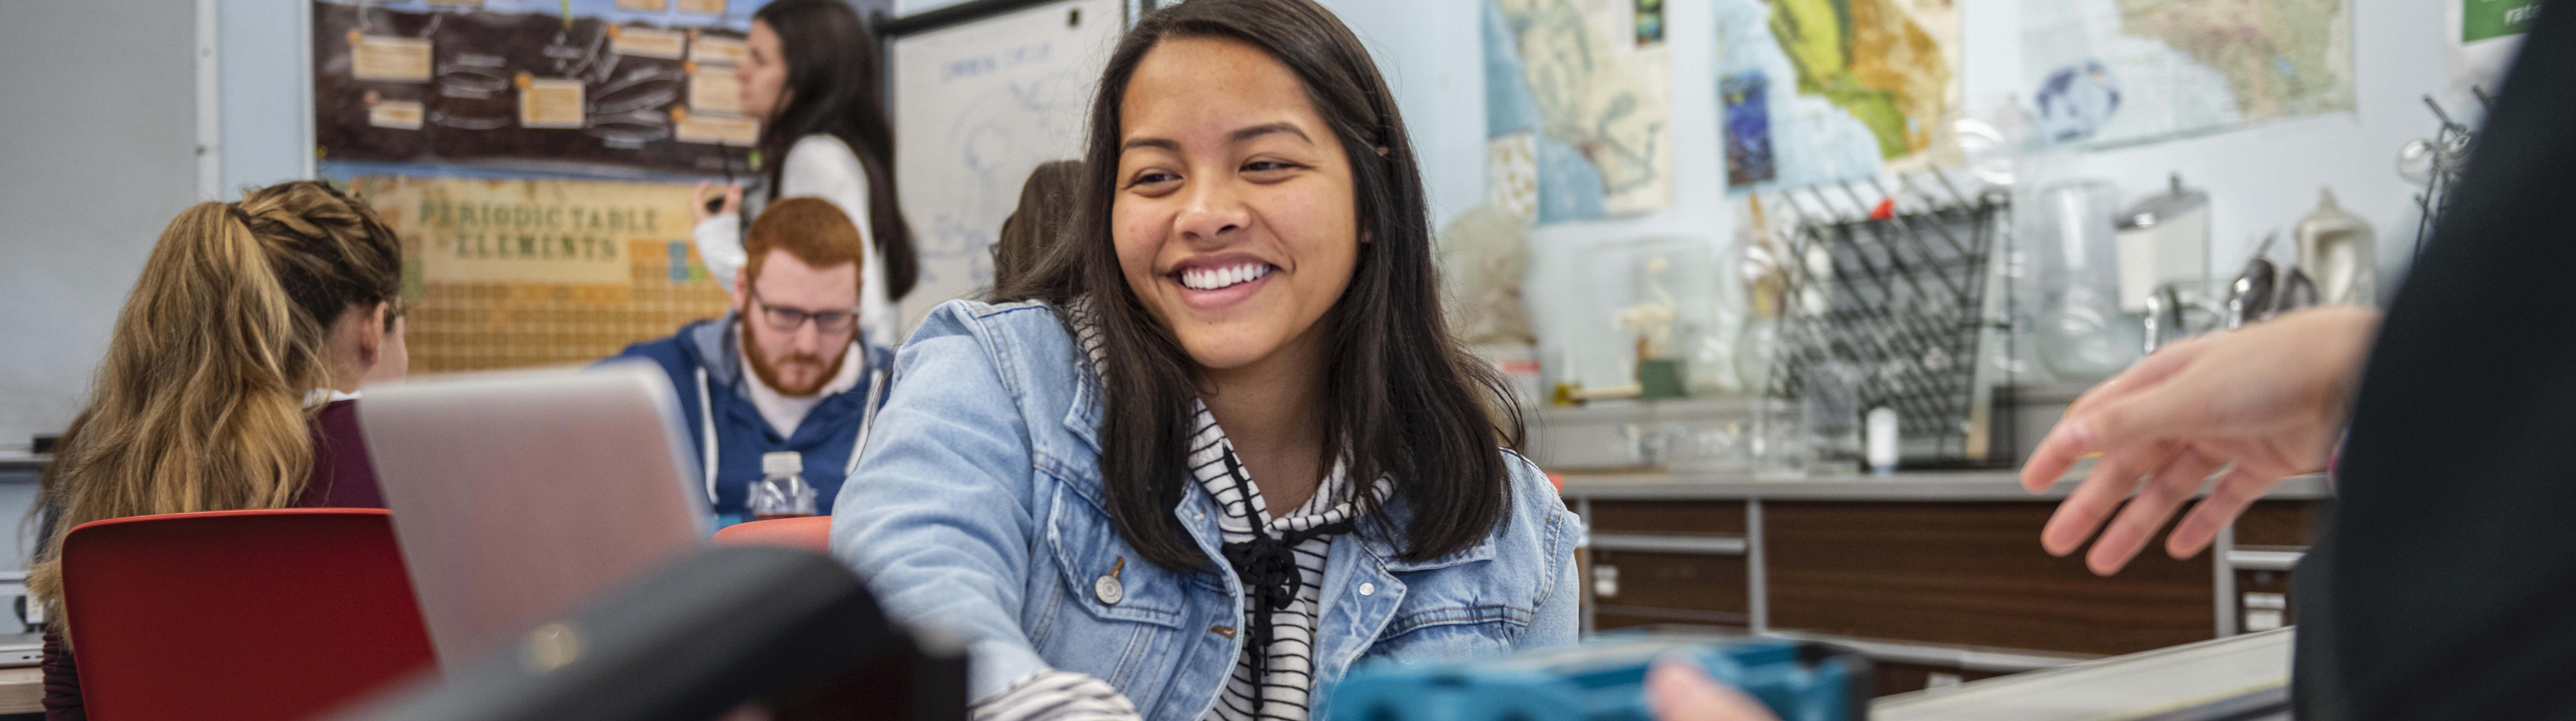 A student smiles during a discussion in a classroom.